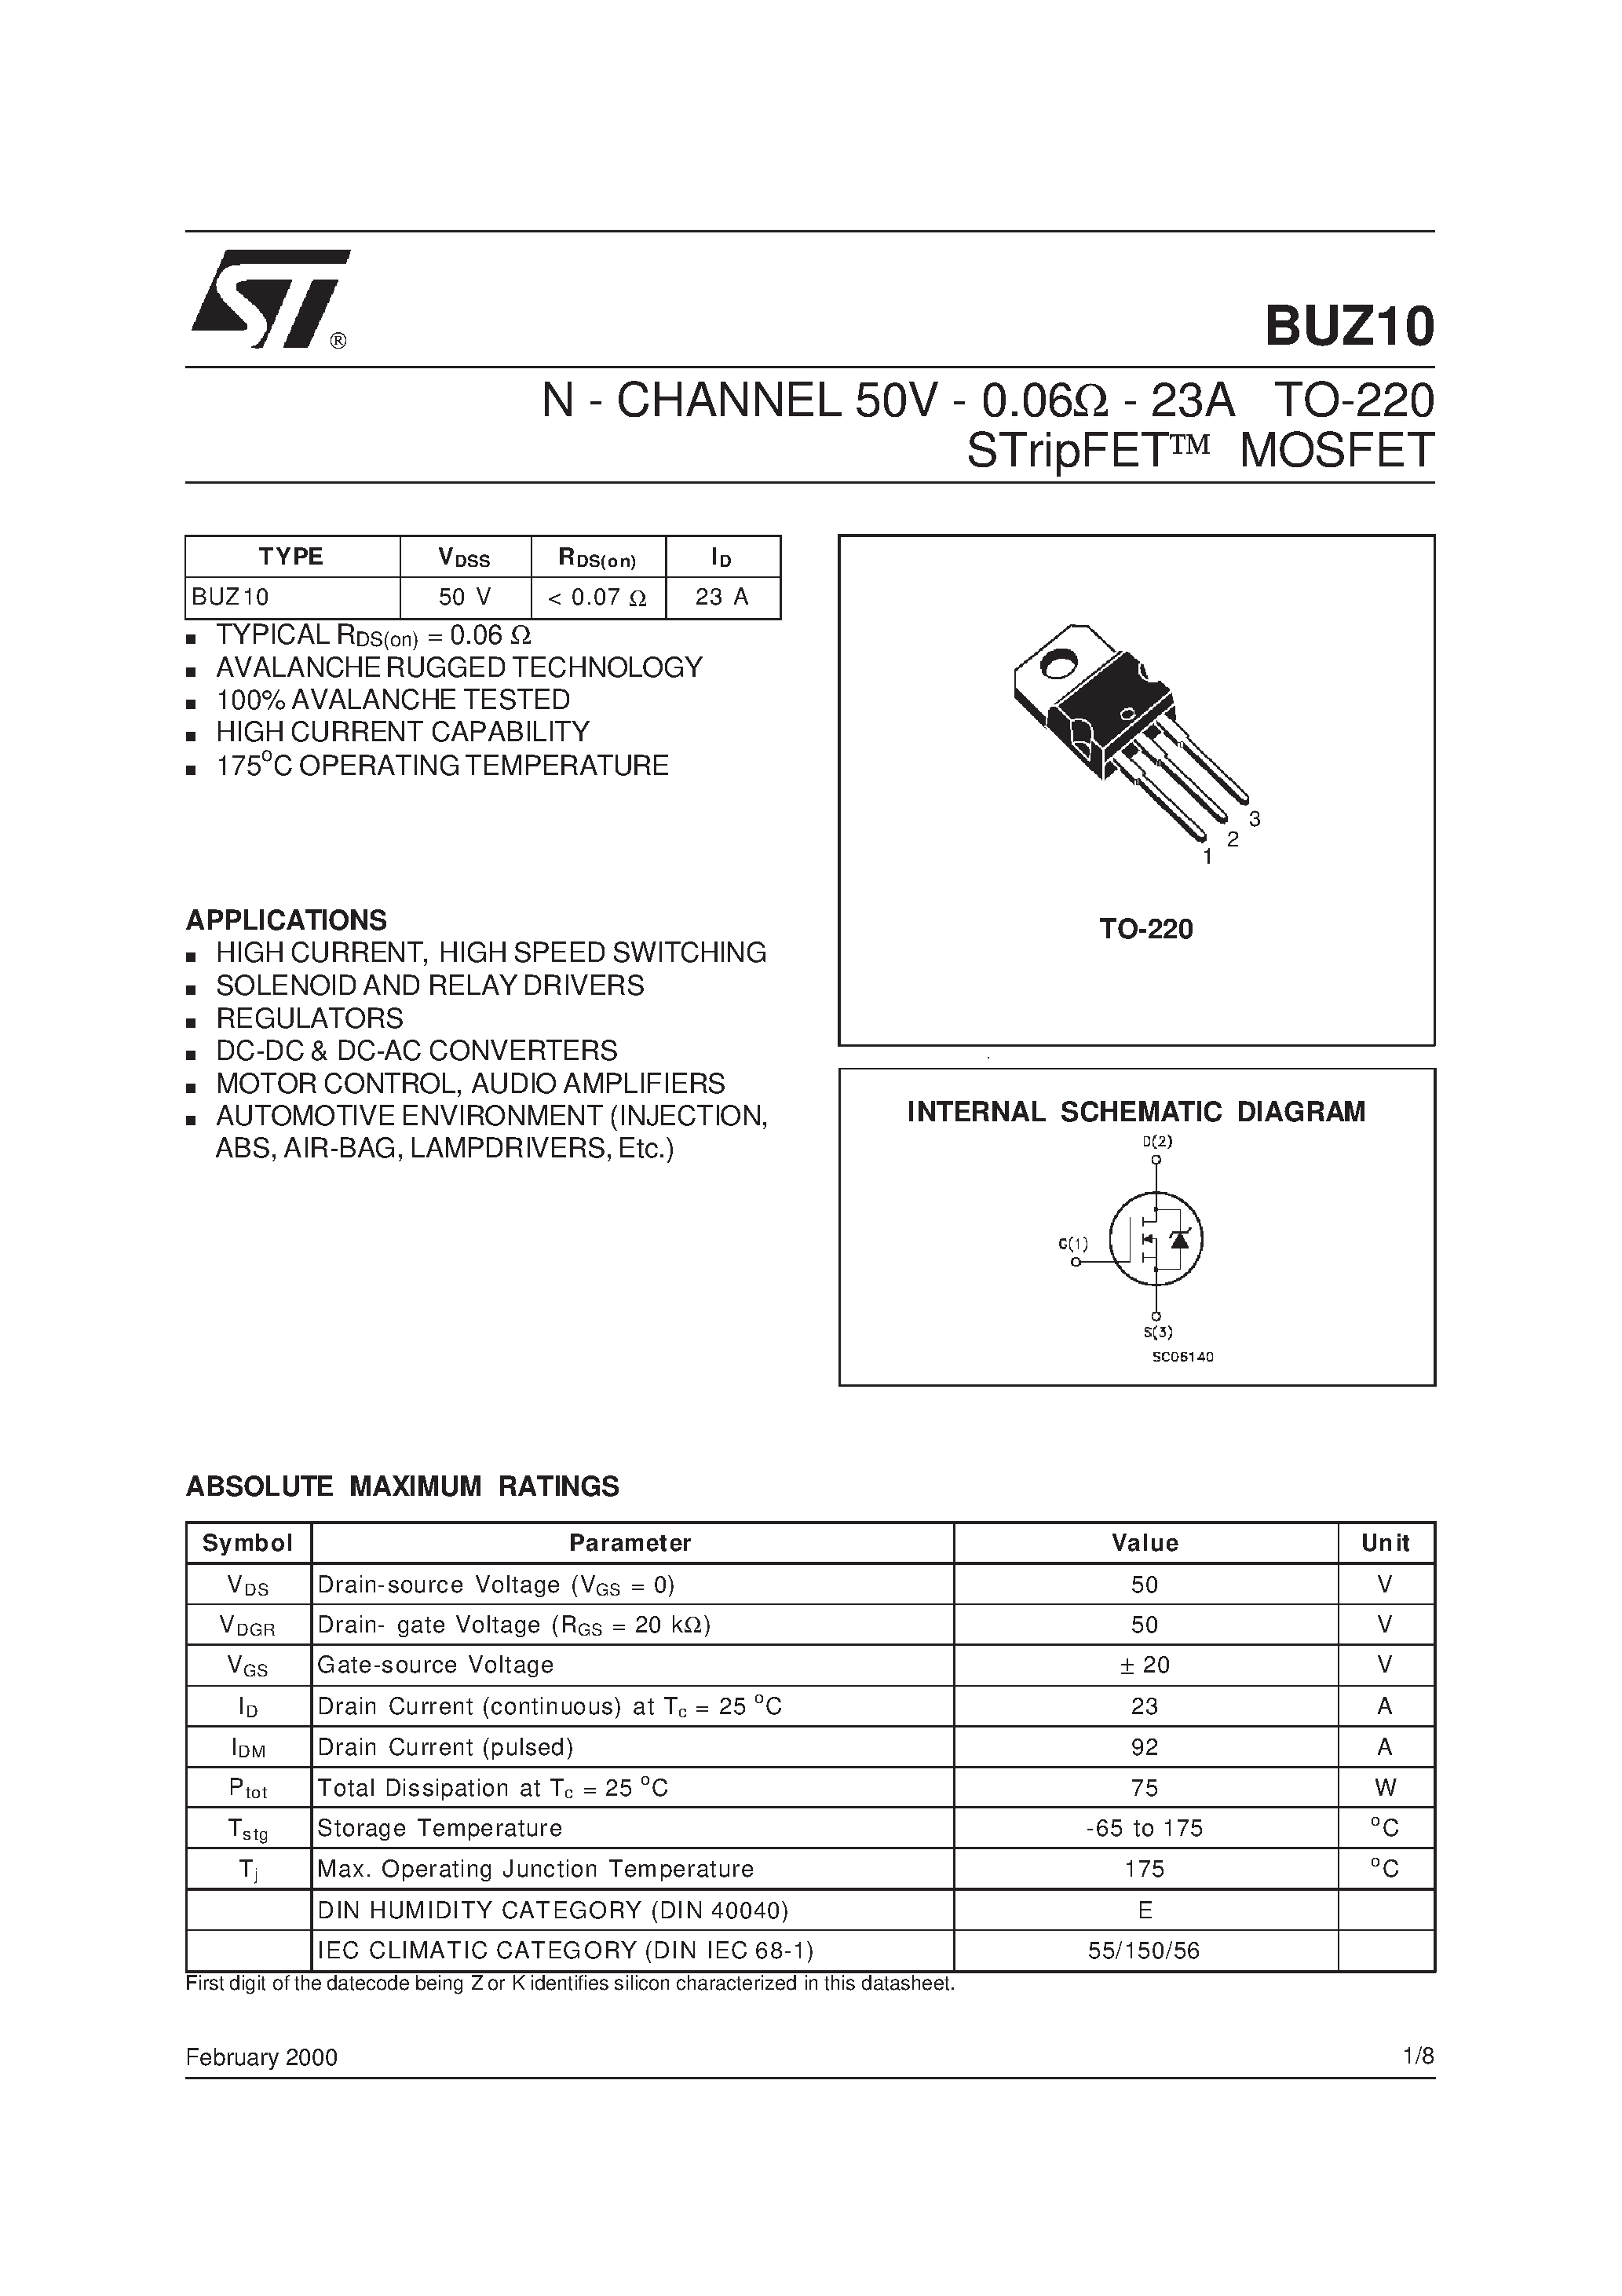 Datasheet BUZ10 - N - CHANNEL 50V - 0.06W - 23A TO-220 STripFET] MOSFET page 1